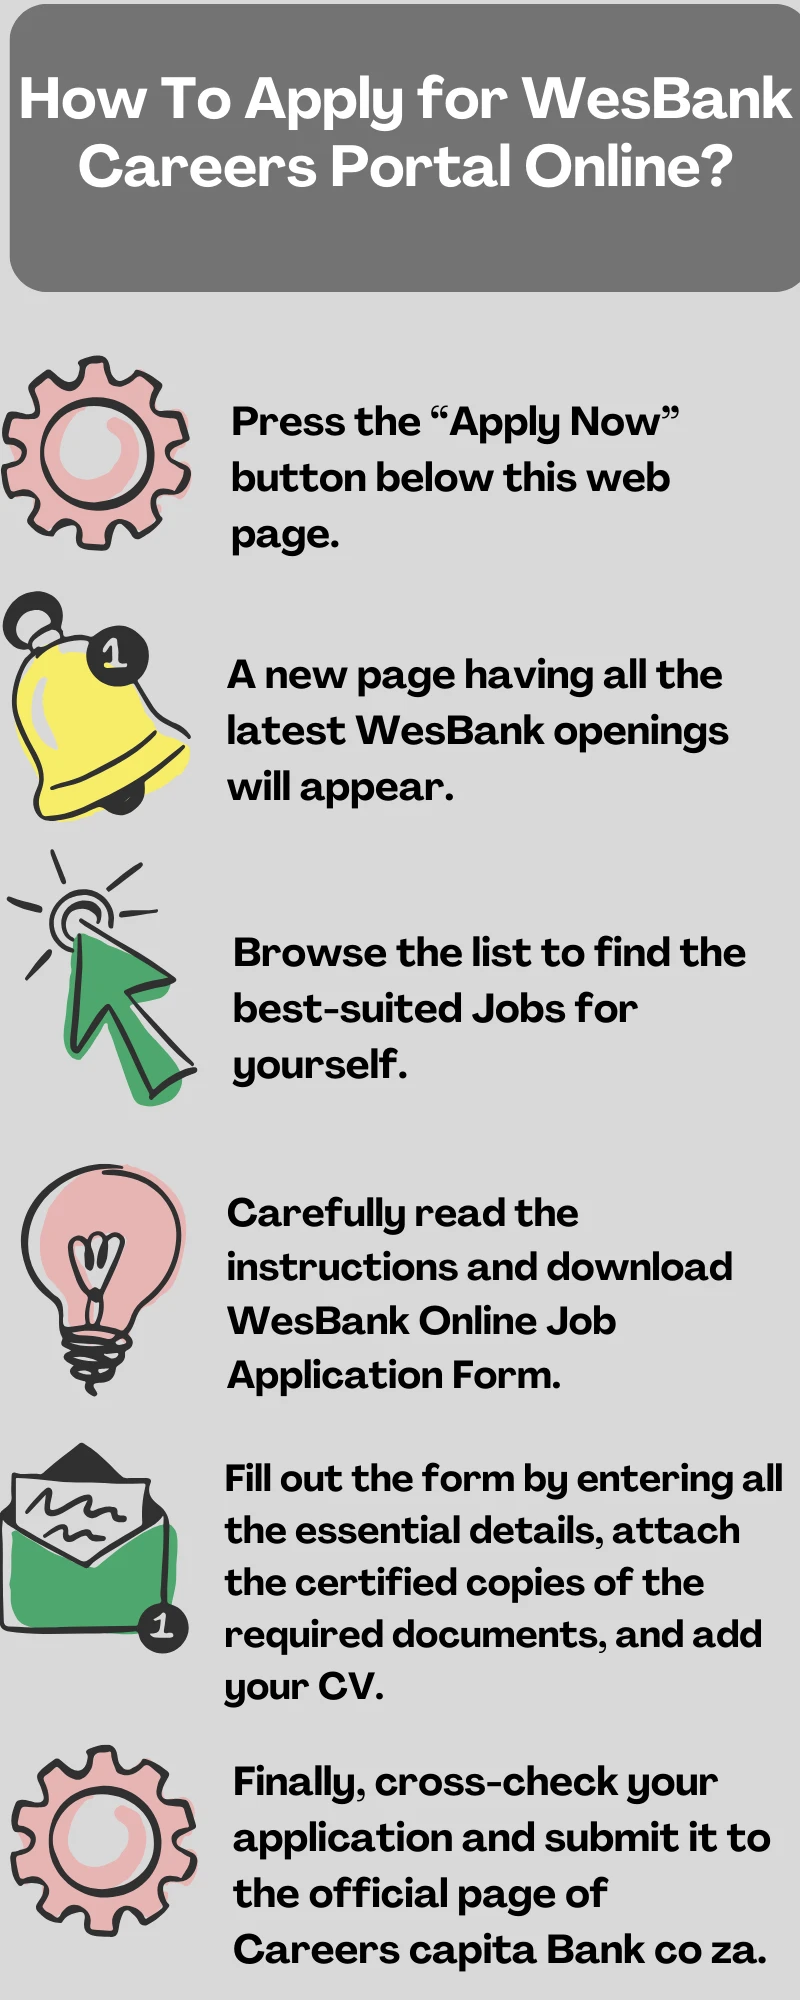 How To Apply for WesBank Careers Portal Online?